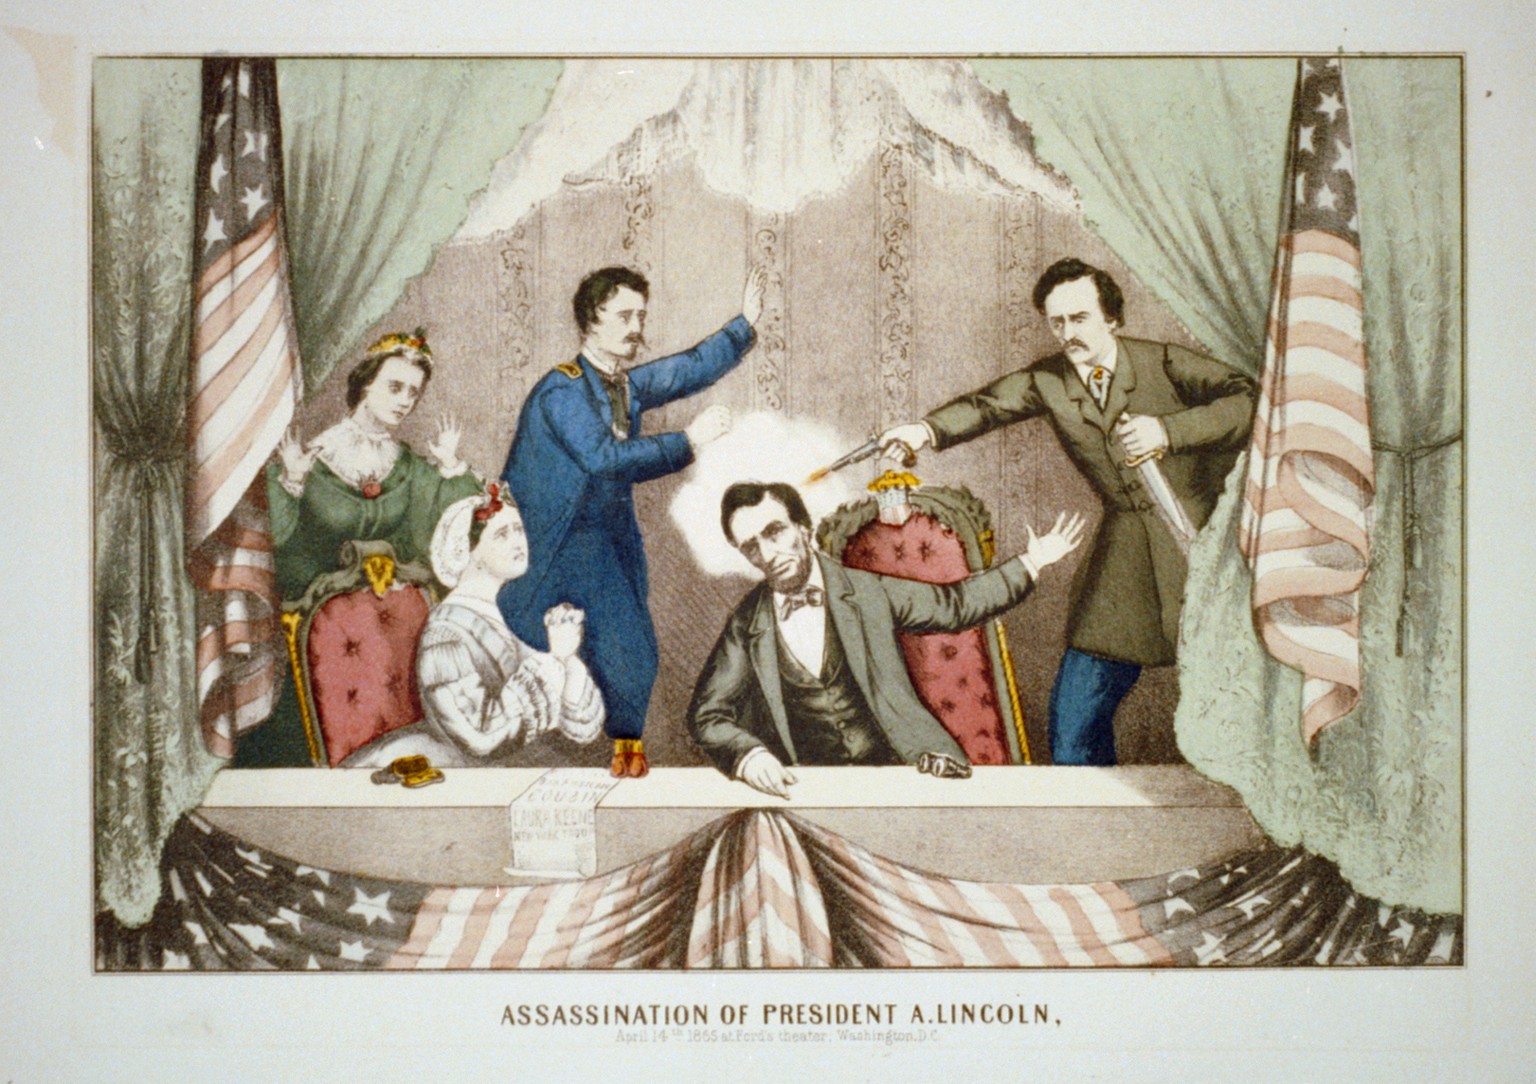 Print shows the president's box at Ford's Theater with John Wilkes Booth, on the right, shooting President Lincoln who is seated at the front of the box; on the left are Mary Todd Lincoln seated in the front, Major Henry Rathbone rising to stop Booth, and Clara Harris standing behind Mrs. Lincoln